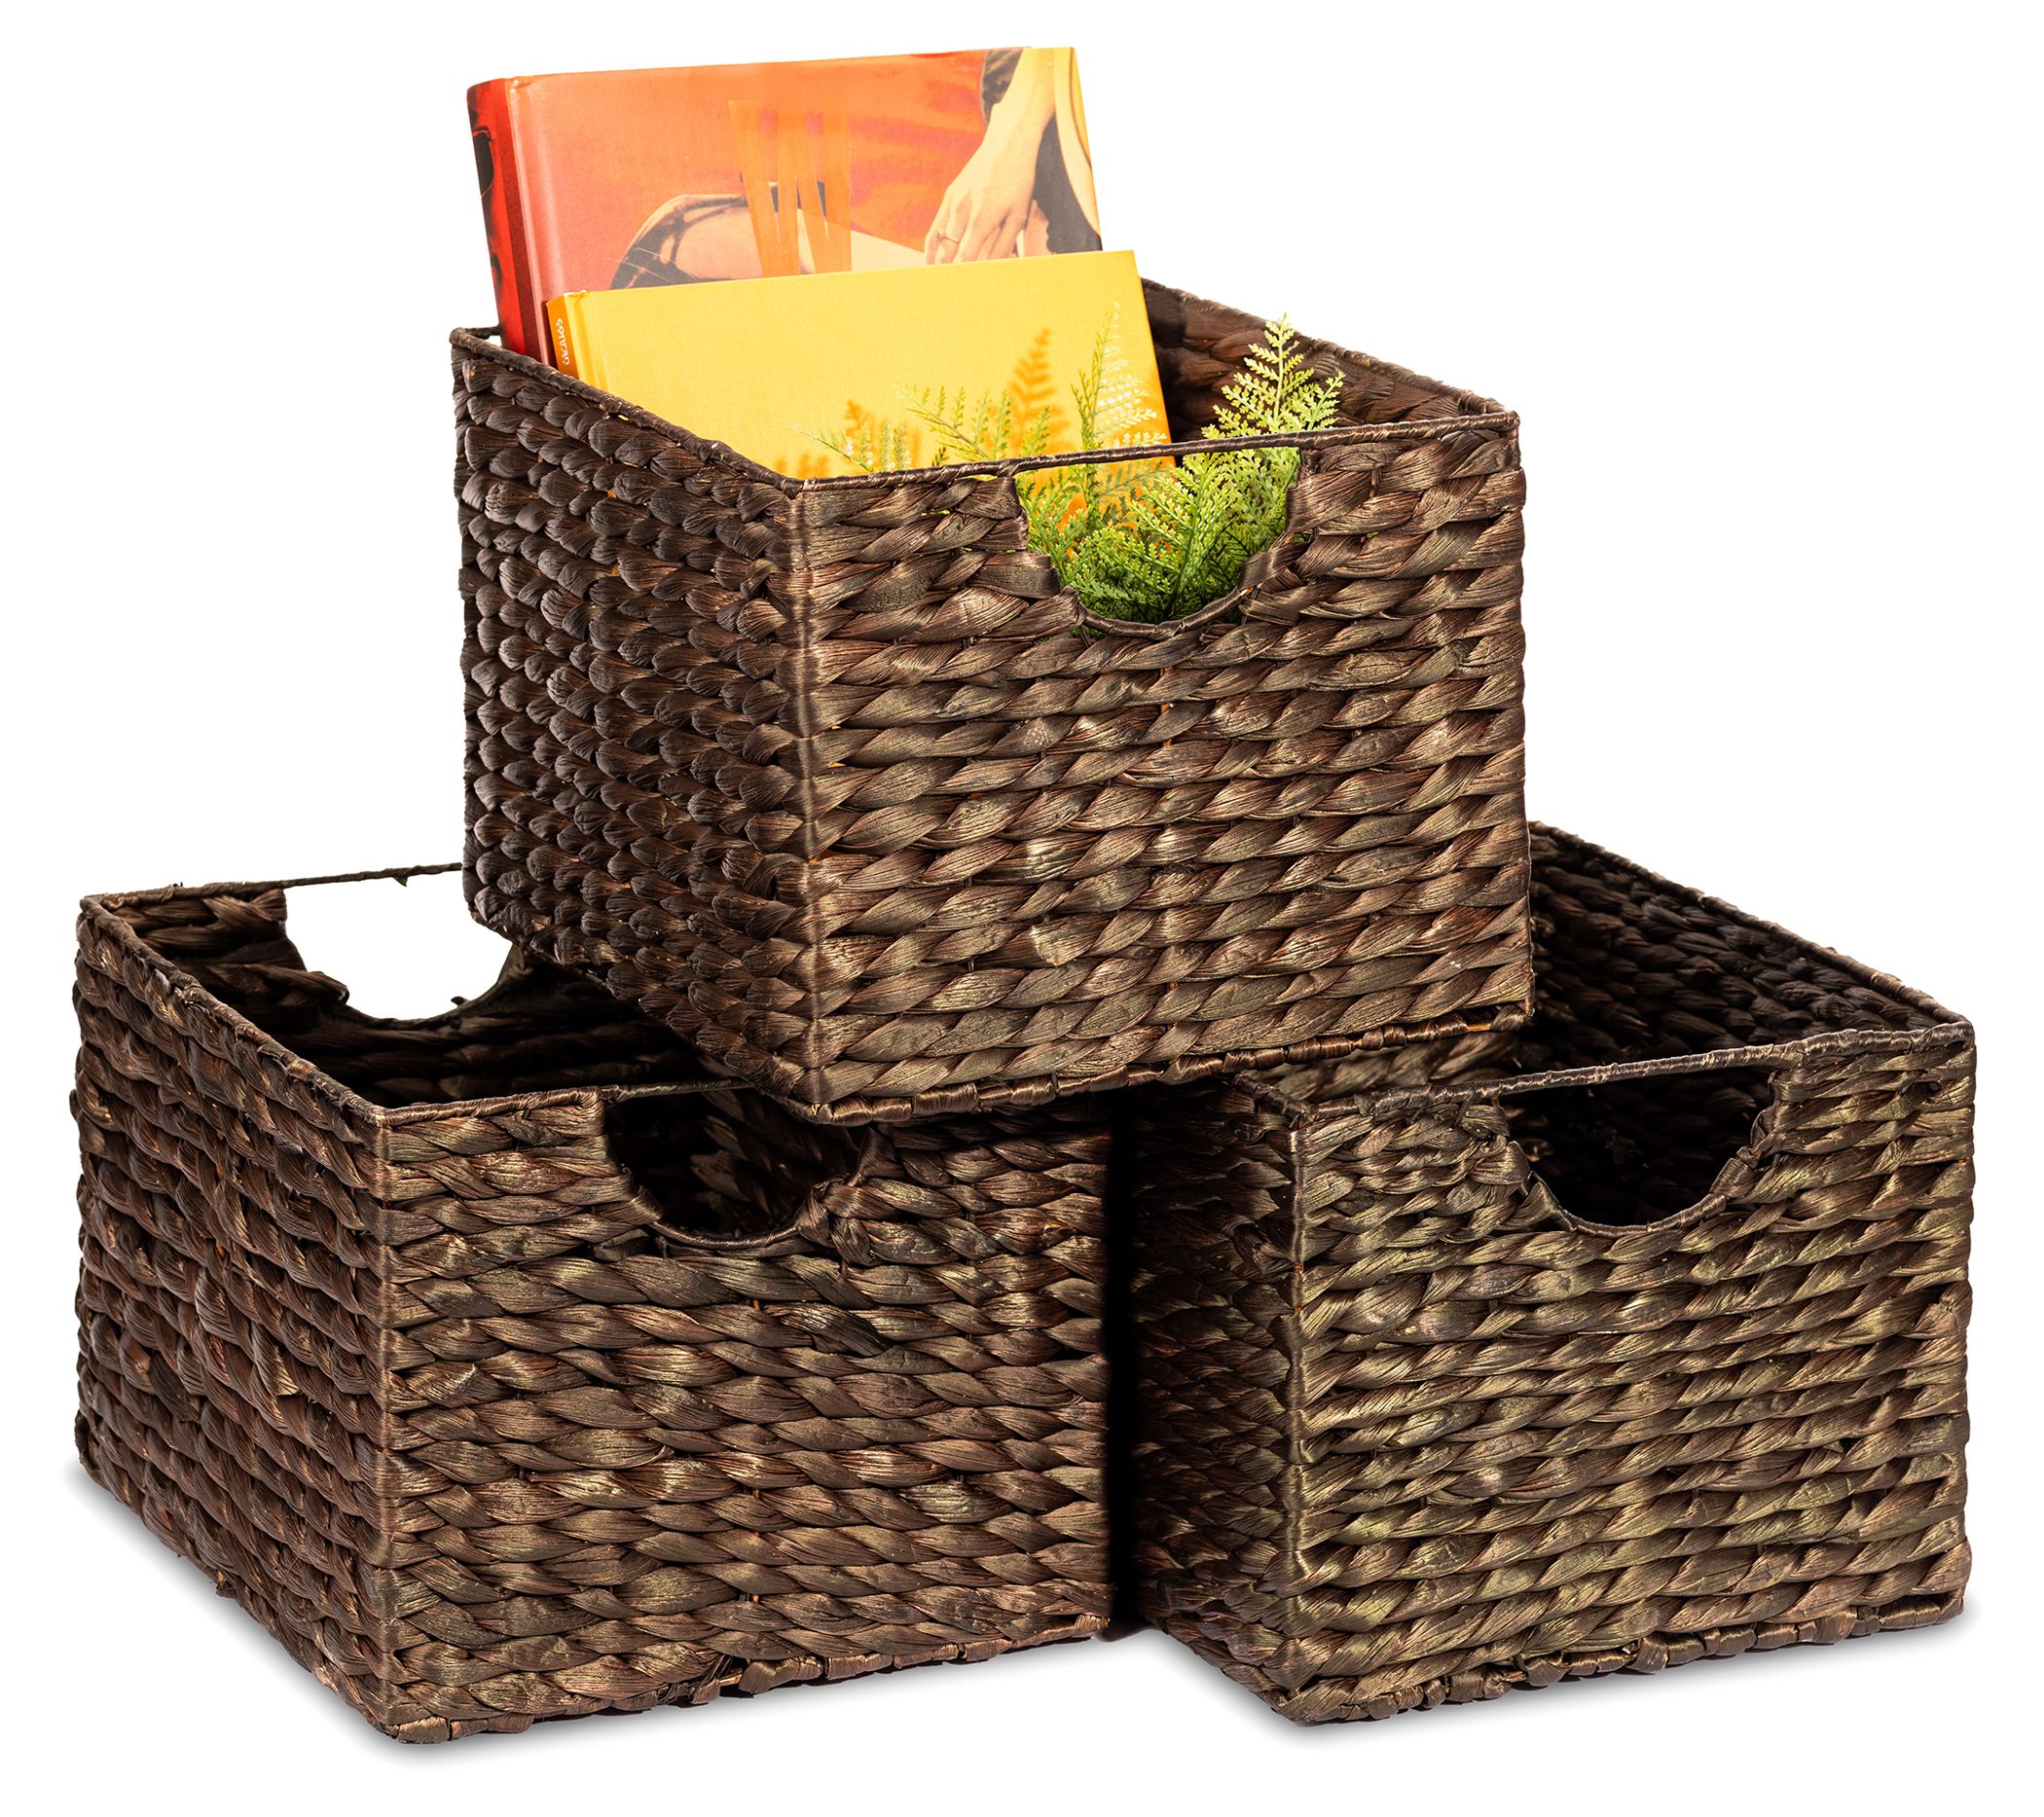 Honey Can Do Set of Two Fox Shaped Storage Baskets with Lid, Natural